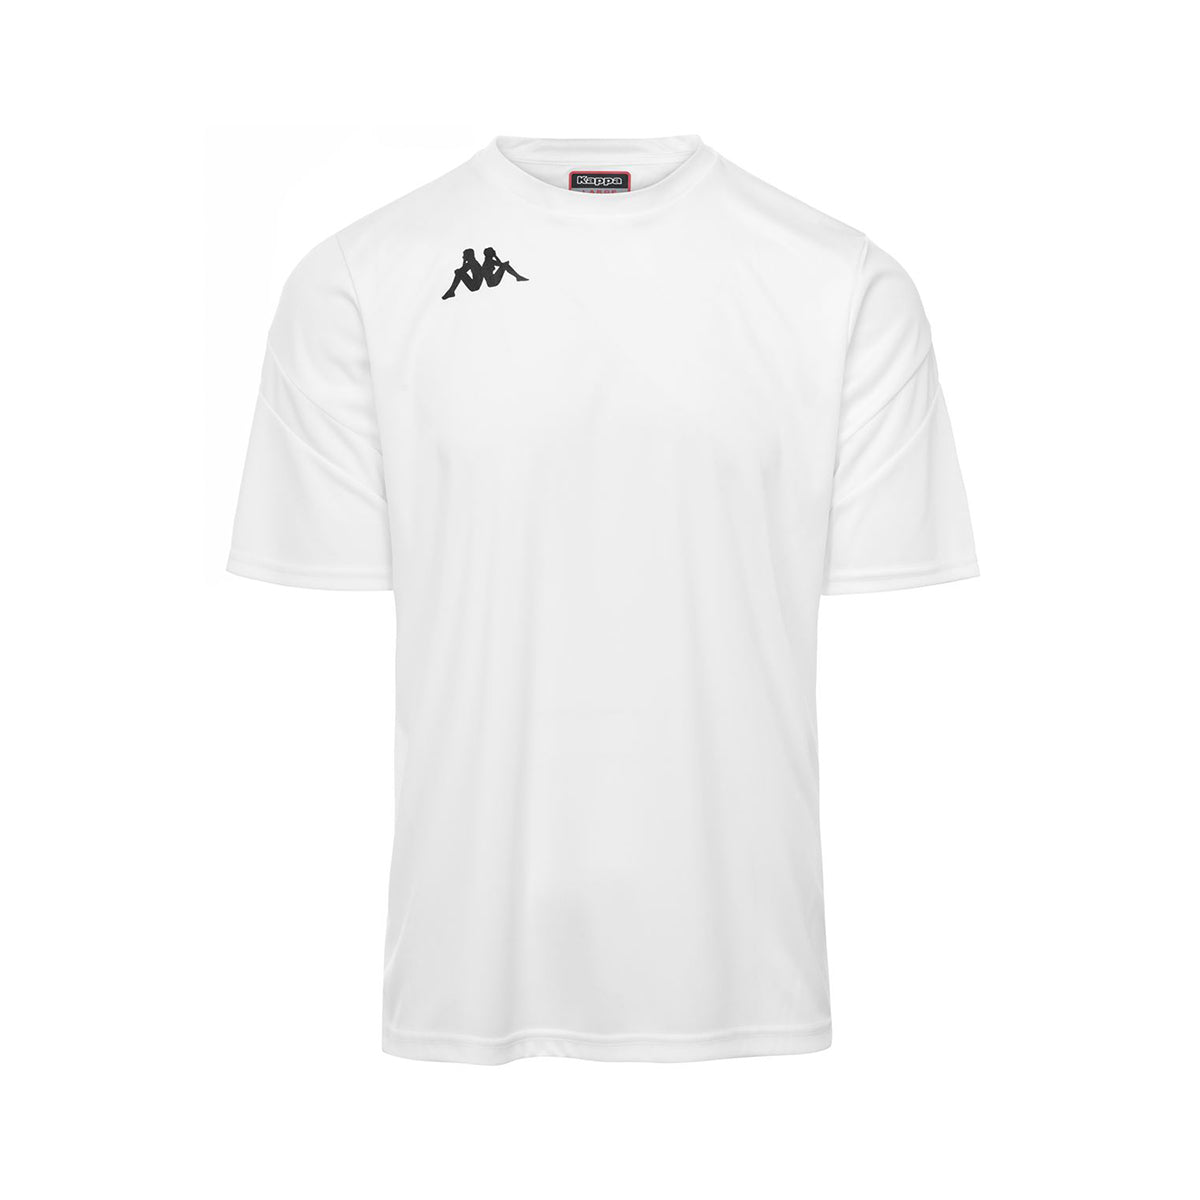 Maillot Dovo Blanc Homme - Image 1